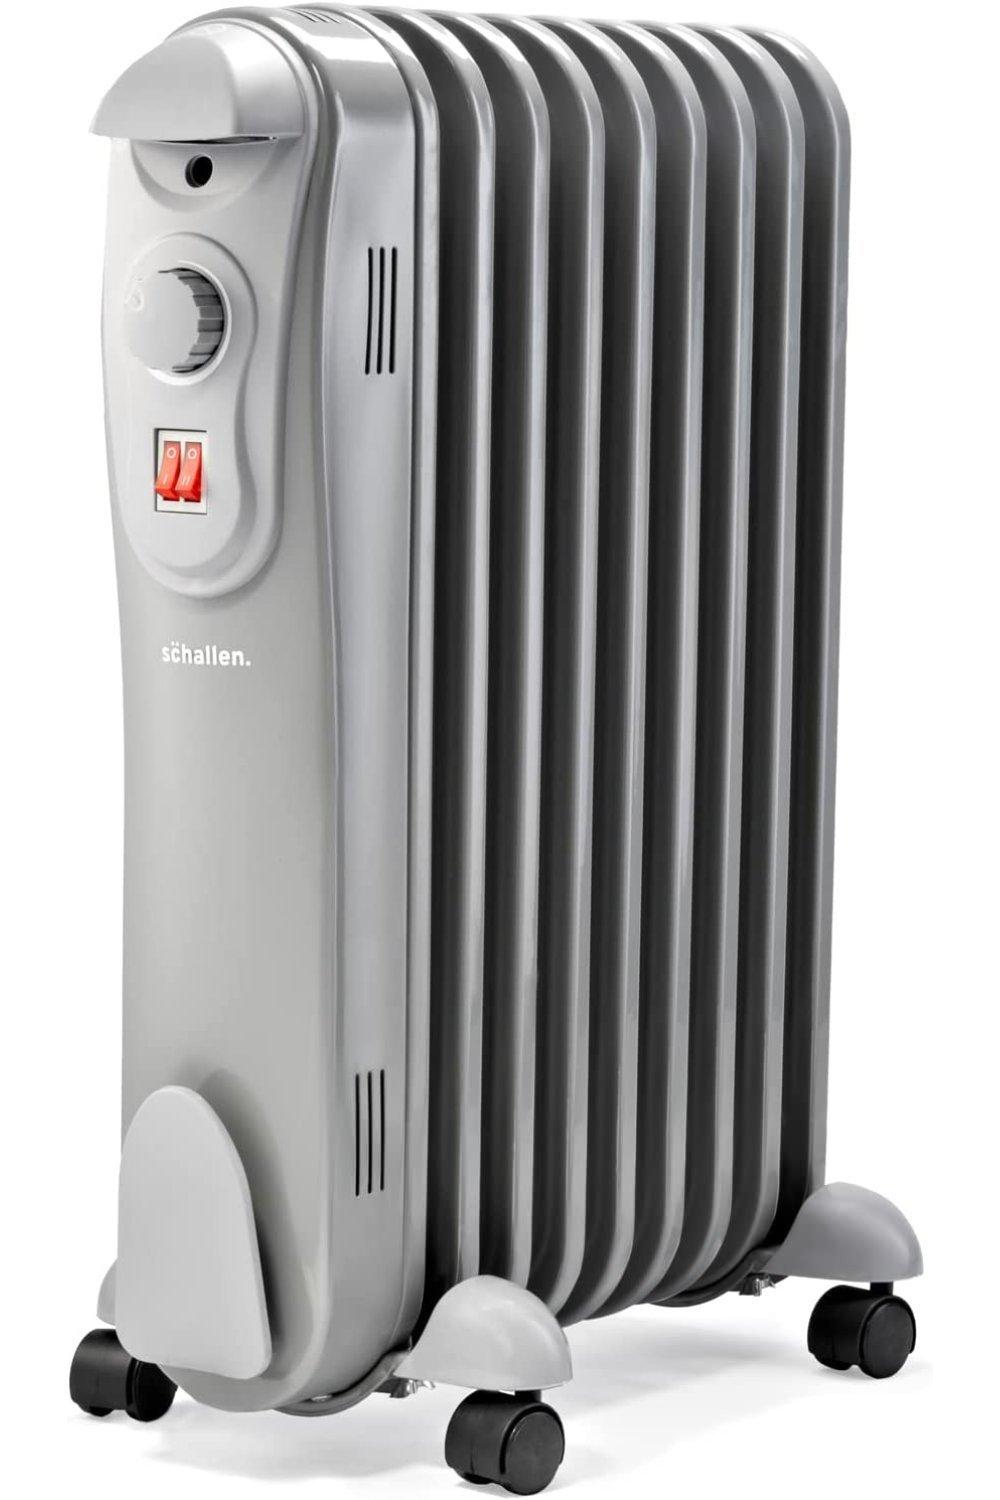 2000W 9 Fin Portable Electric Slim Oil Filled Radiator Heater with Adjustable Temperature Thermostat